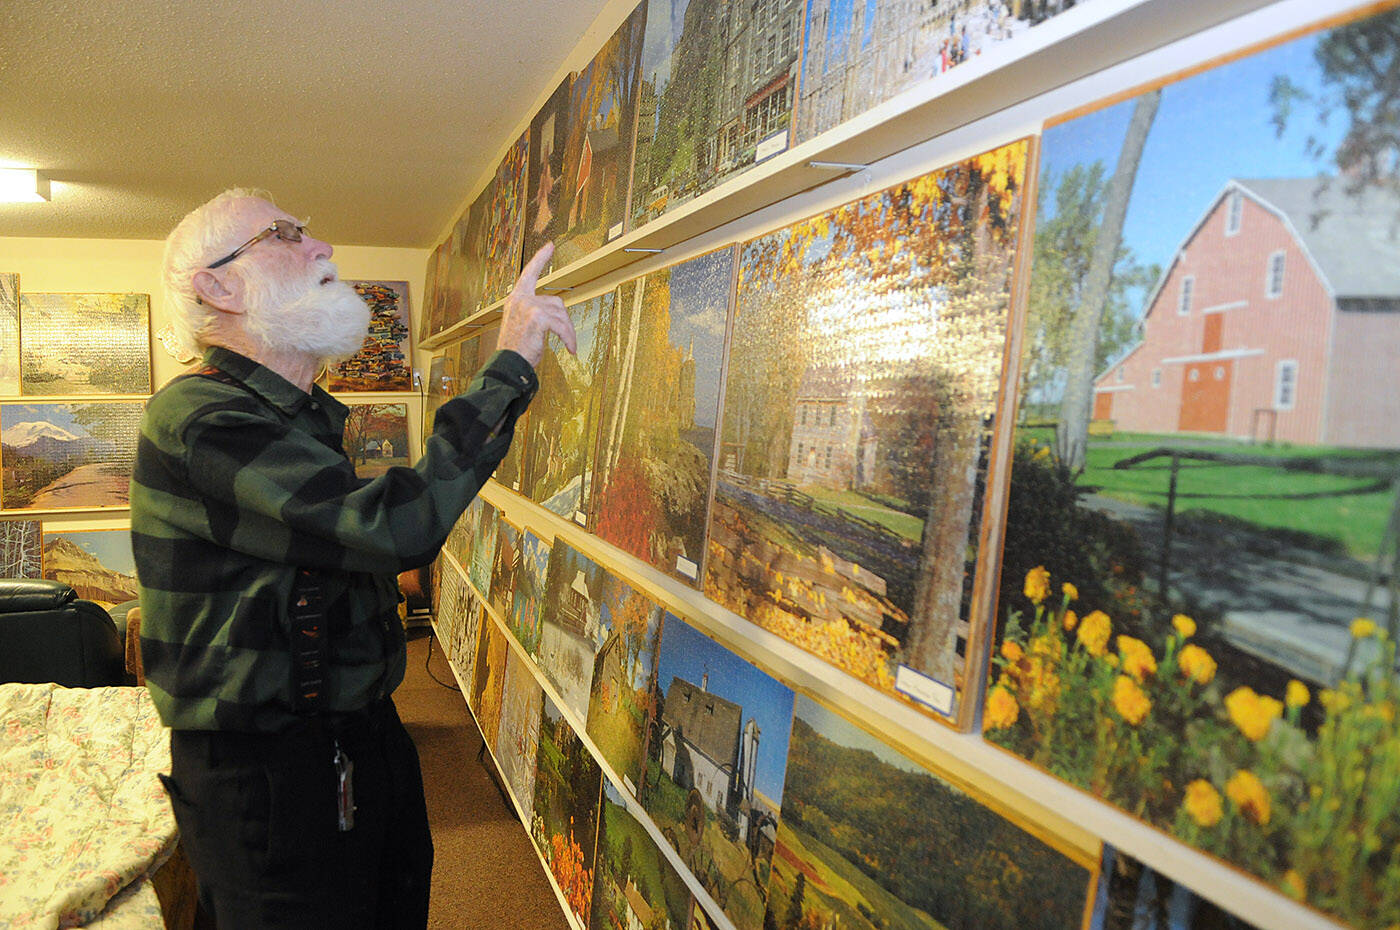 Joe Sommer has completed 190 jigsaw puzzles, all of which are on display in the basement of his Chilliwack home. (Jenna Hauck/ Chilliwack Progress)